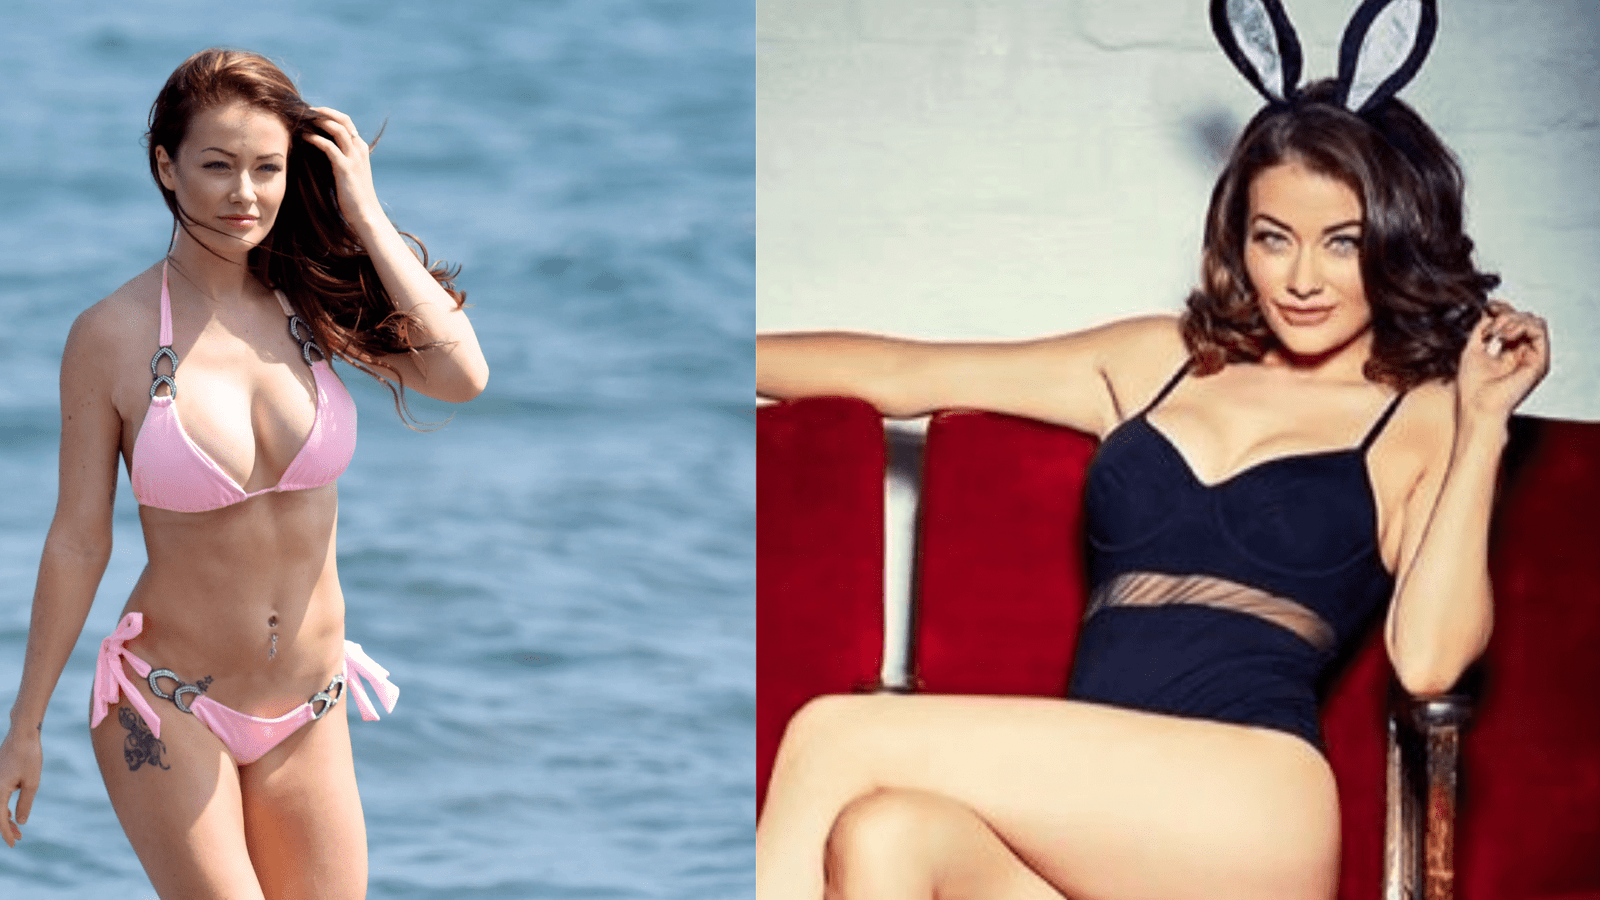 jess Impiazzi Biography – Life of American Actress